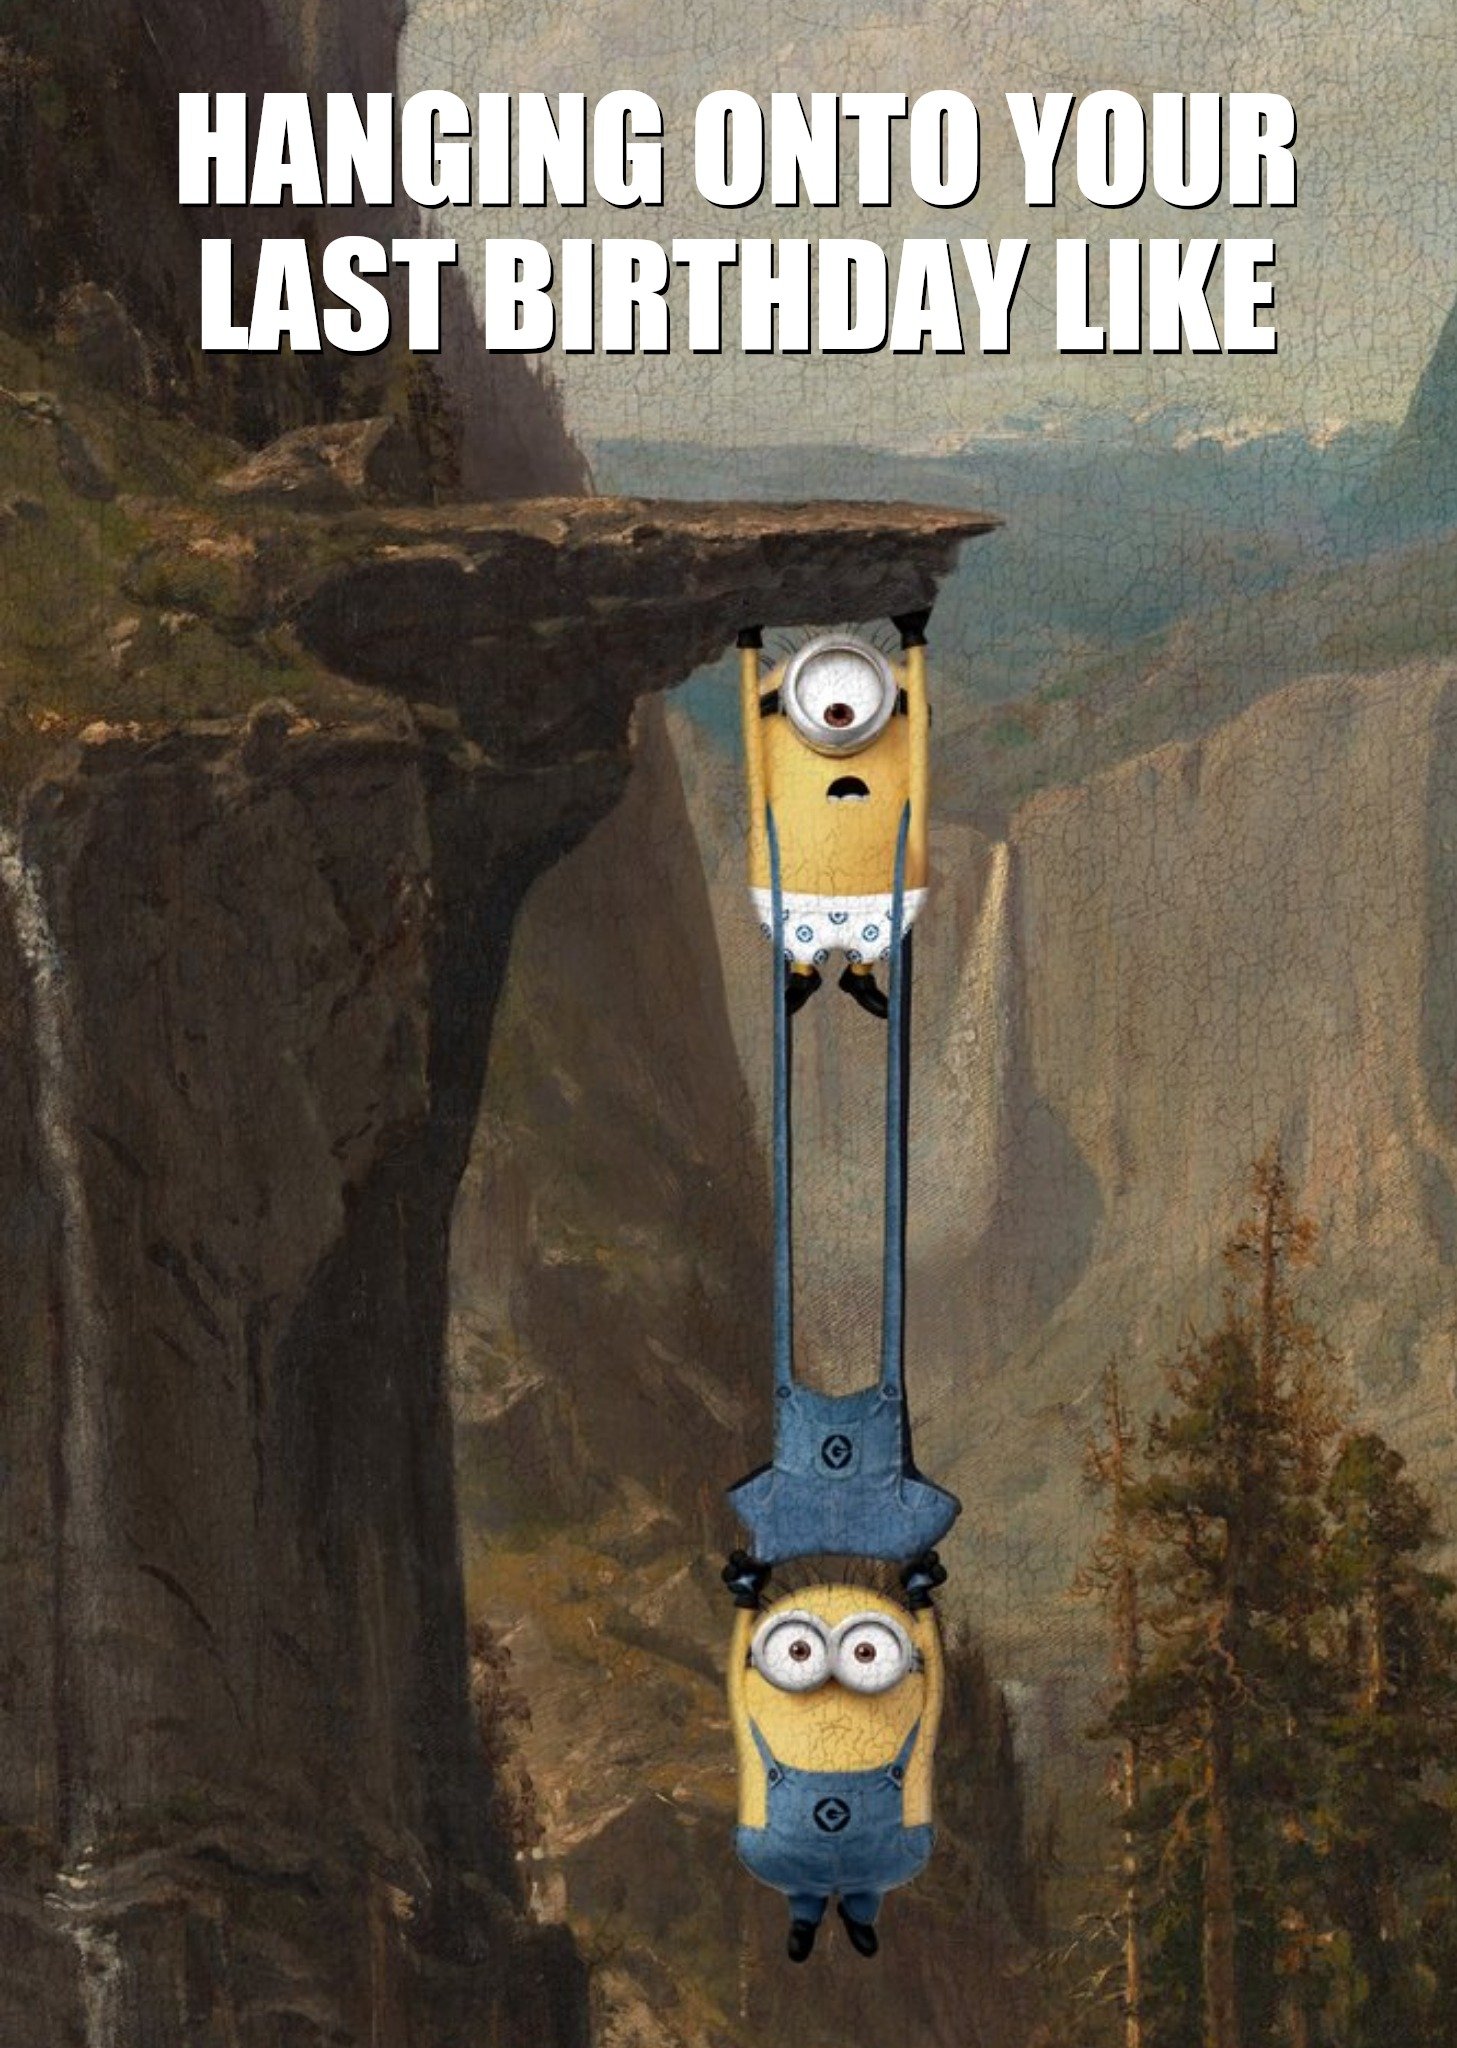 Despicable Me Minions Birthday Card Hanging Onto Your Last Birthday Like, Large